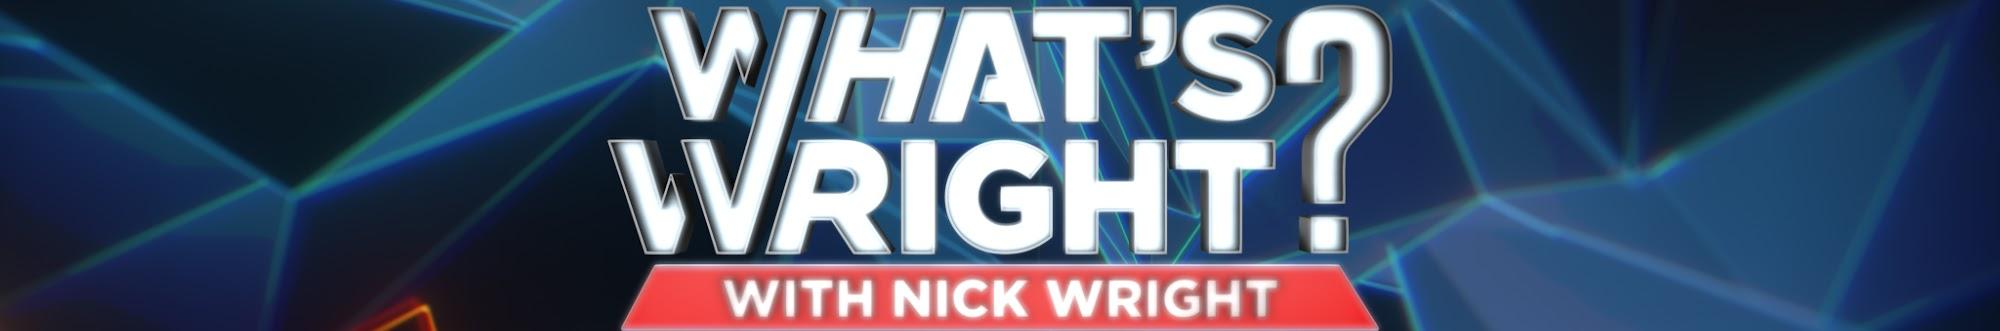 What's Wright? With Nick Wright